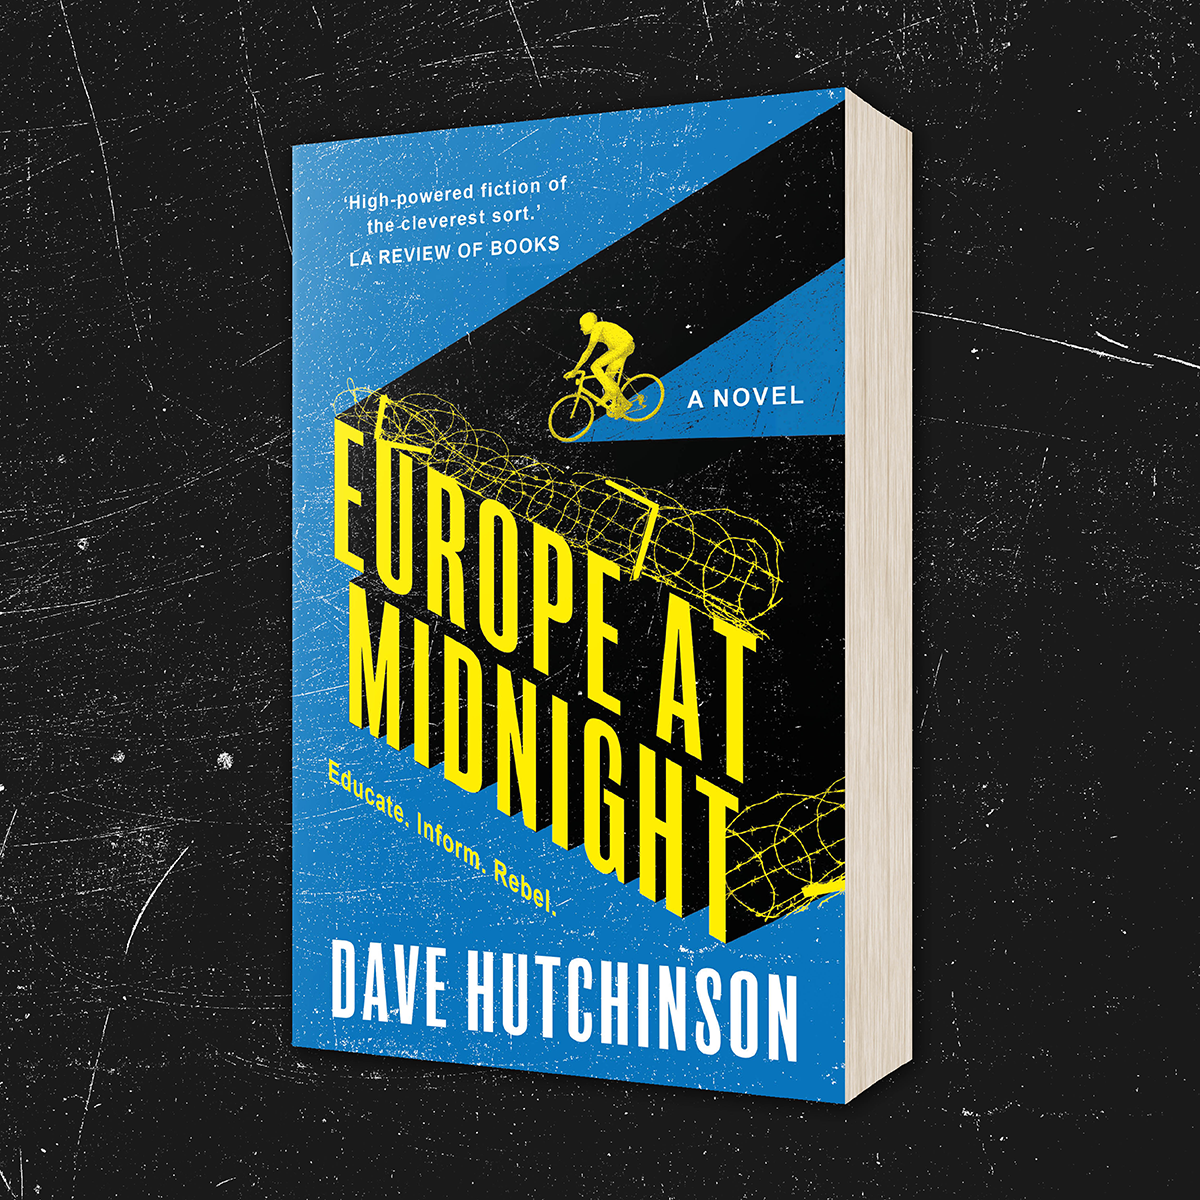 Image of the Europe at Midnight front cover